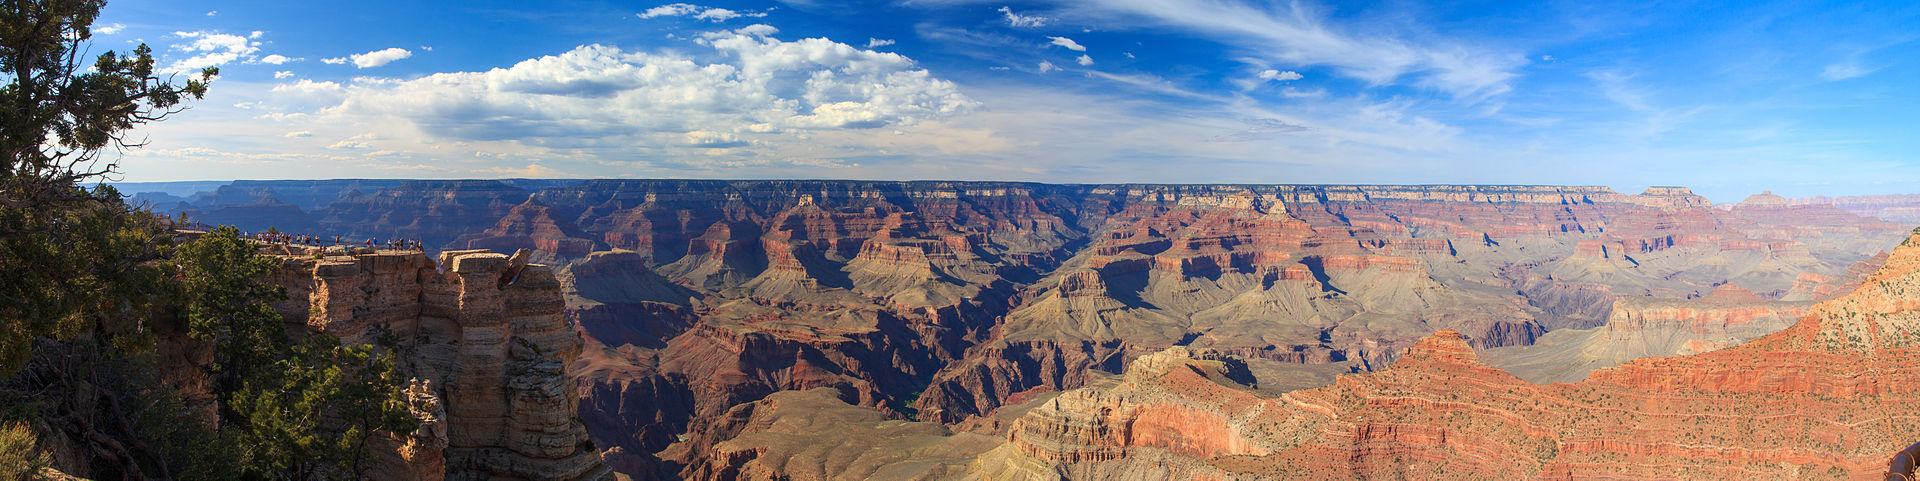 View of Grand Canyon National Park from The Abyss